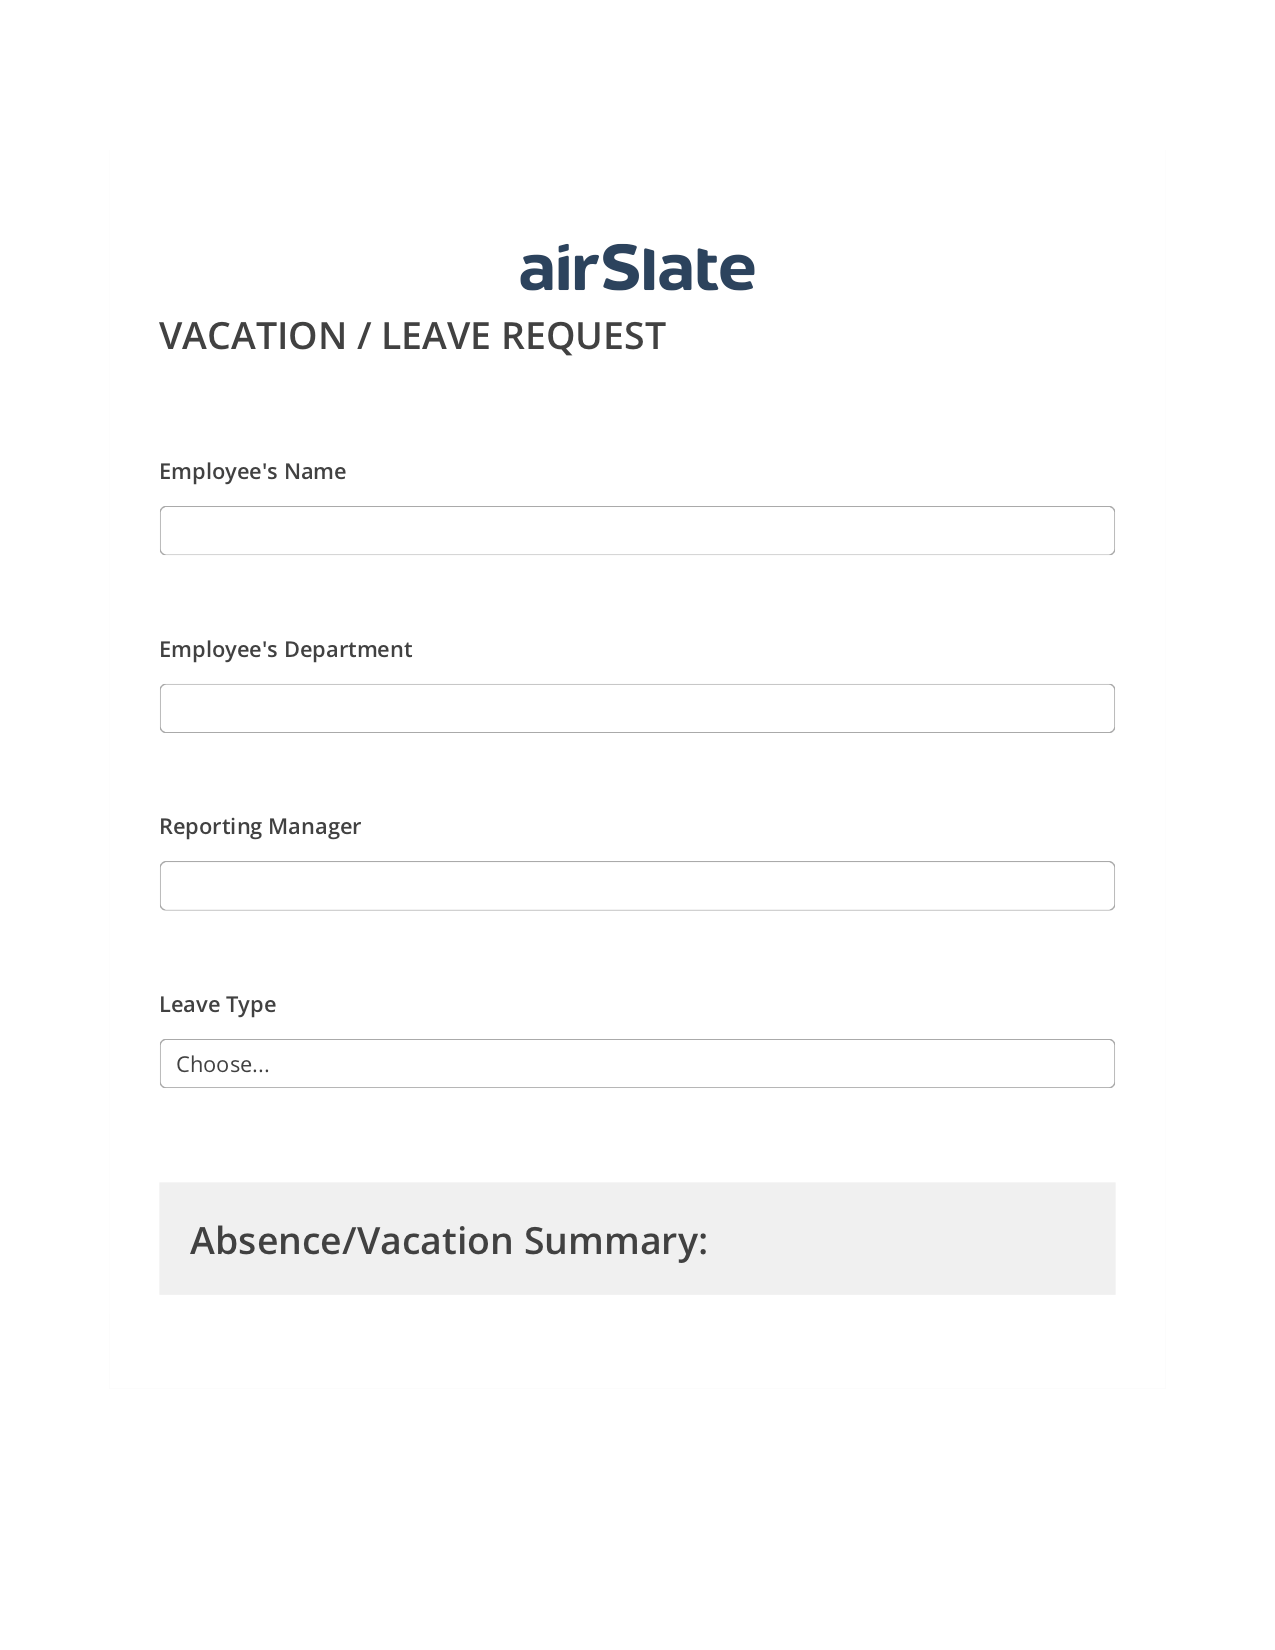 Vacation/Leave Request Workflow Pre-fill from Excel Spreadsheet Bot, Roles Reminder Bot, Slack Notification Postfinish Bot